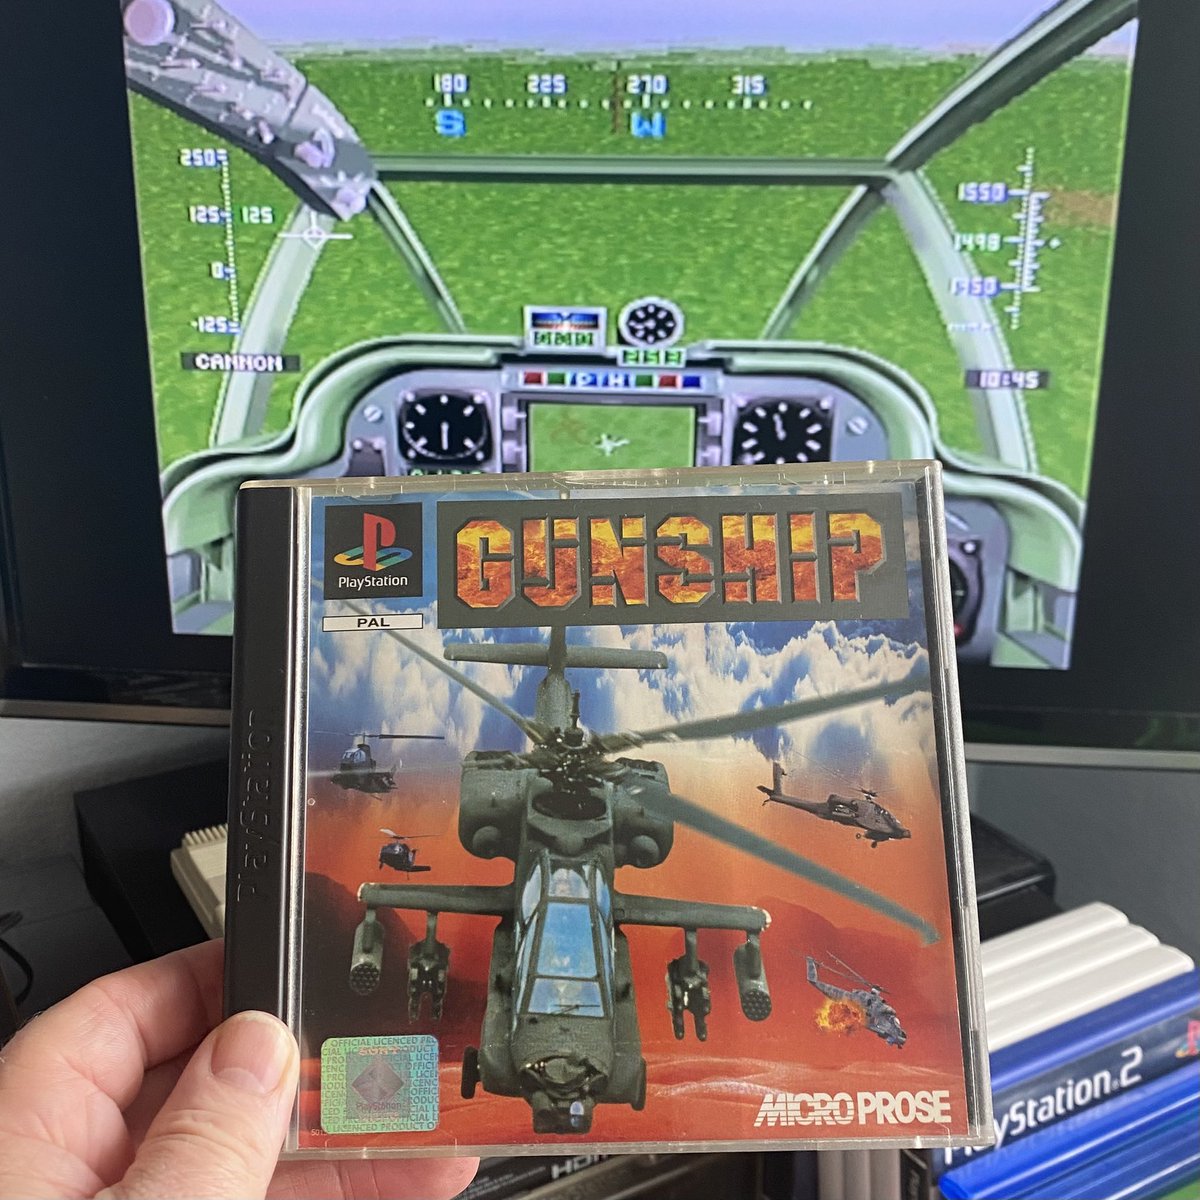 Today I have the #PS1 version of Gunship. The controls have obviously been simplified and yet remarkably this still manages to retain most of the classic gameplay. It maybe easier to fly but the missions remain tough... #Microprose #MicroproseMonday #Retrogaming #ShareYourGames